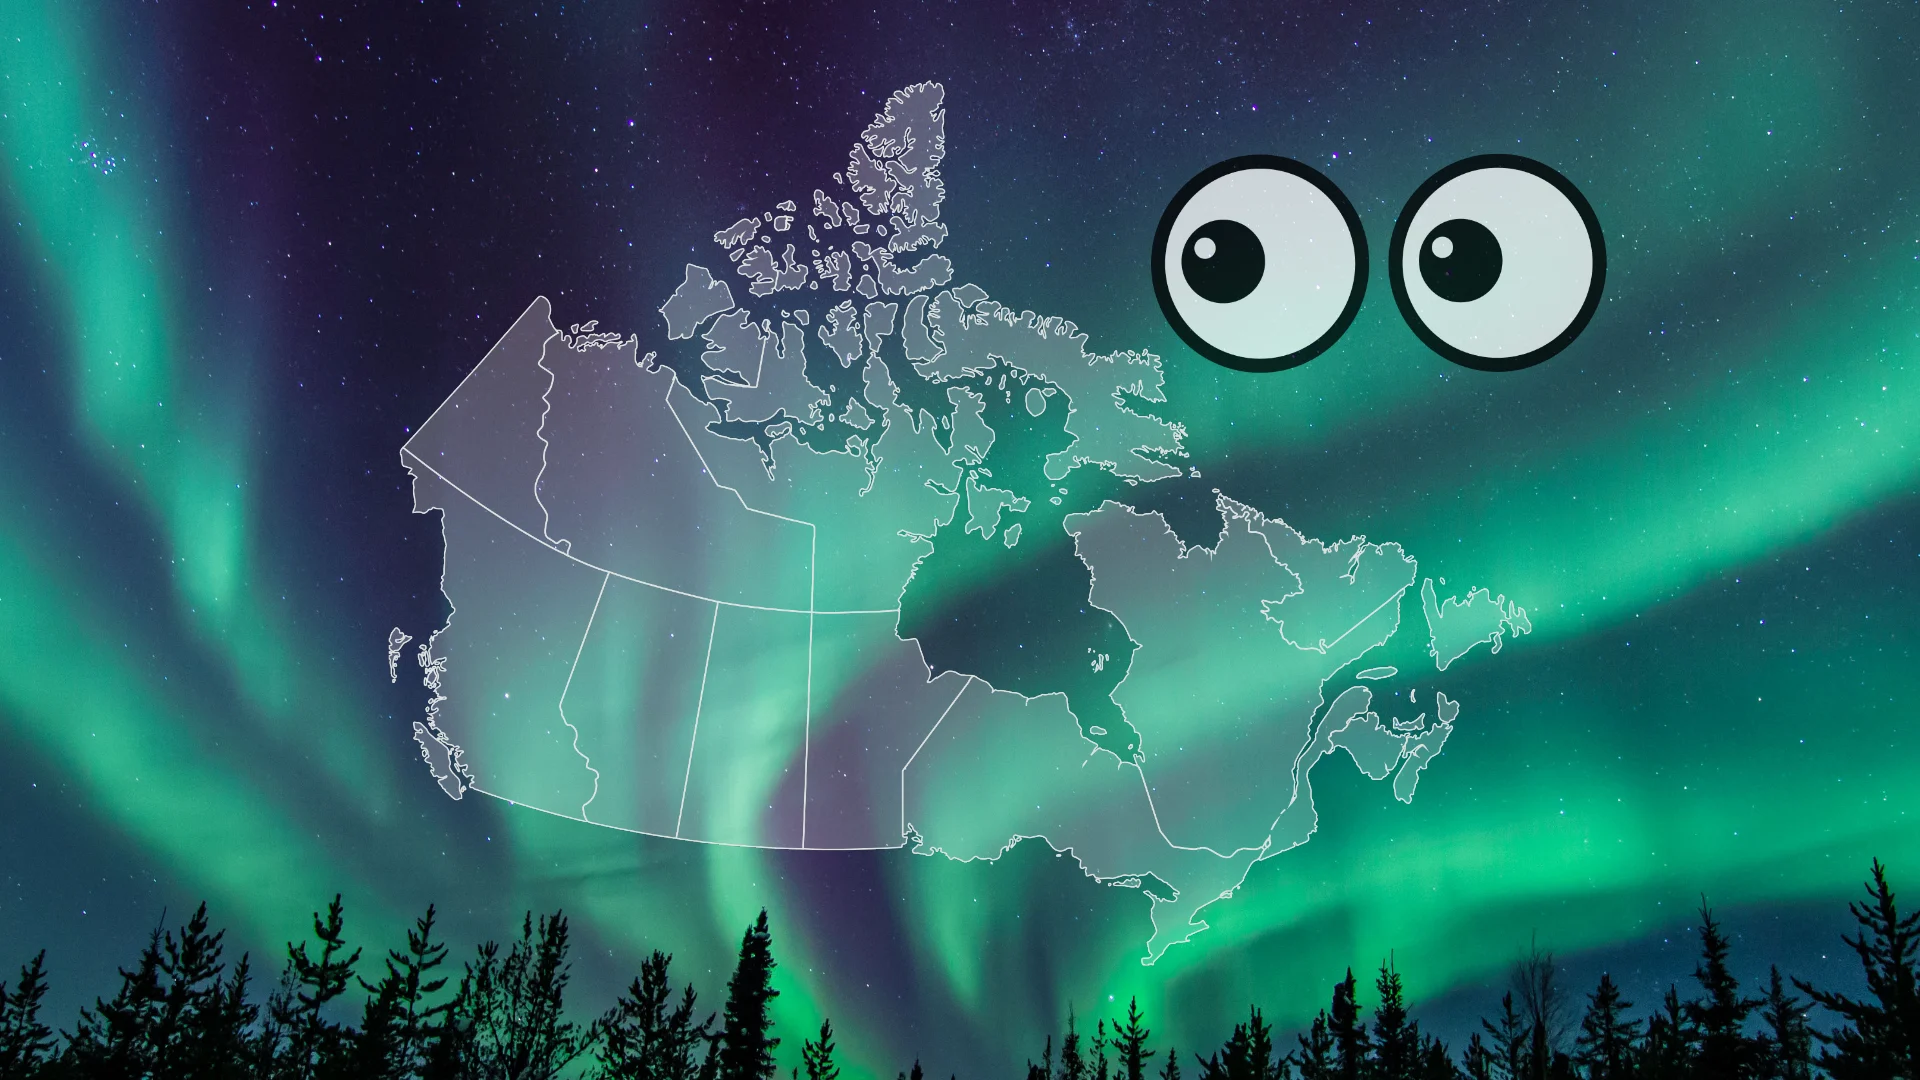 Feeling lucky? Parts of the East Coast might catch a glimpse of auroras Friday night as a ‘severe’ geomagnetic storm hits Earth